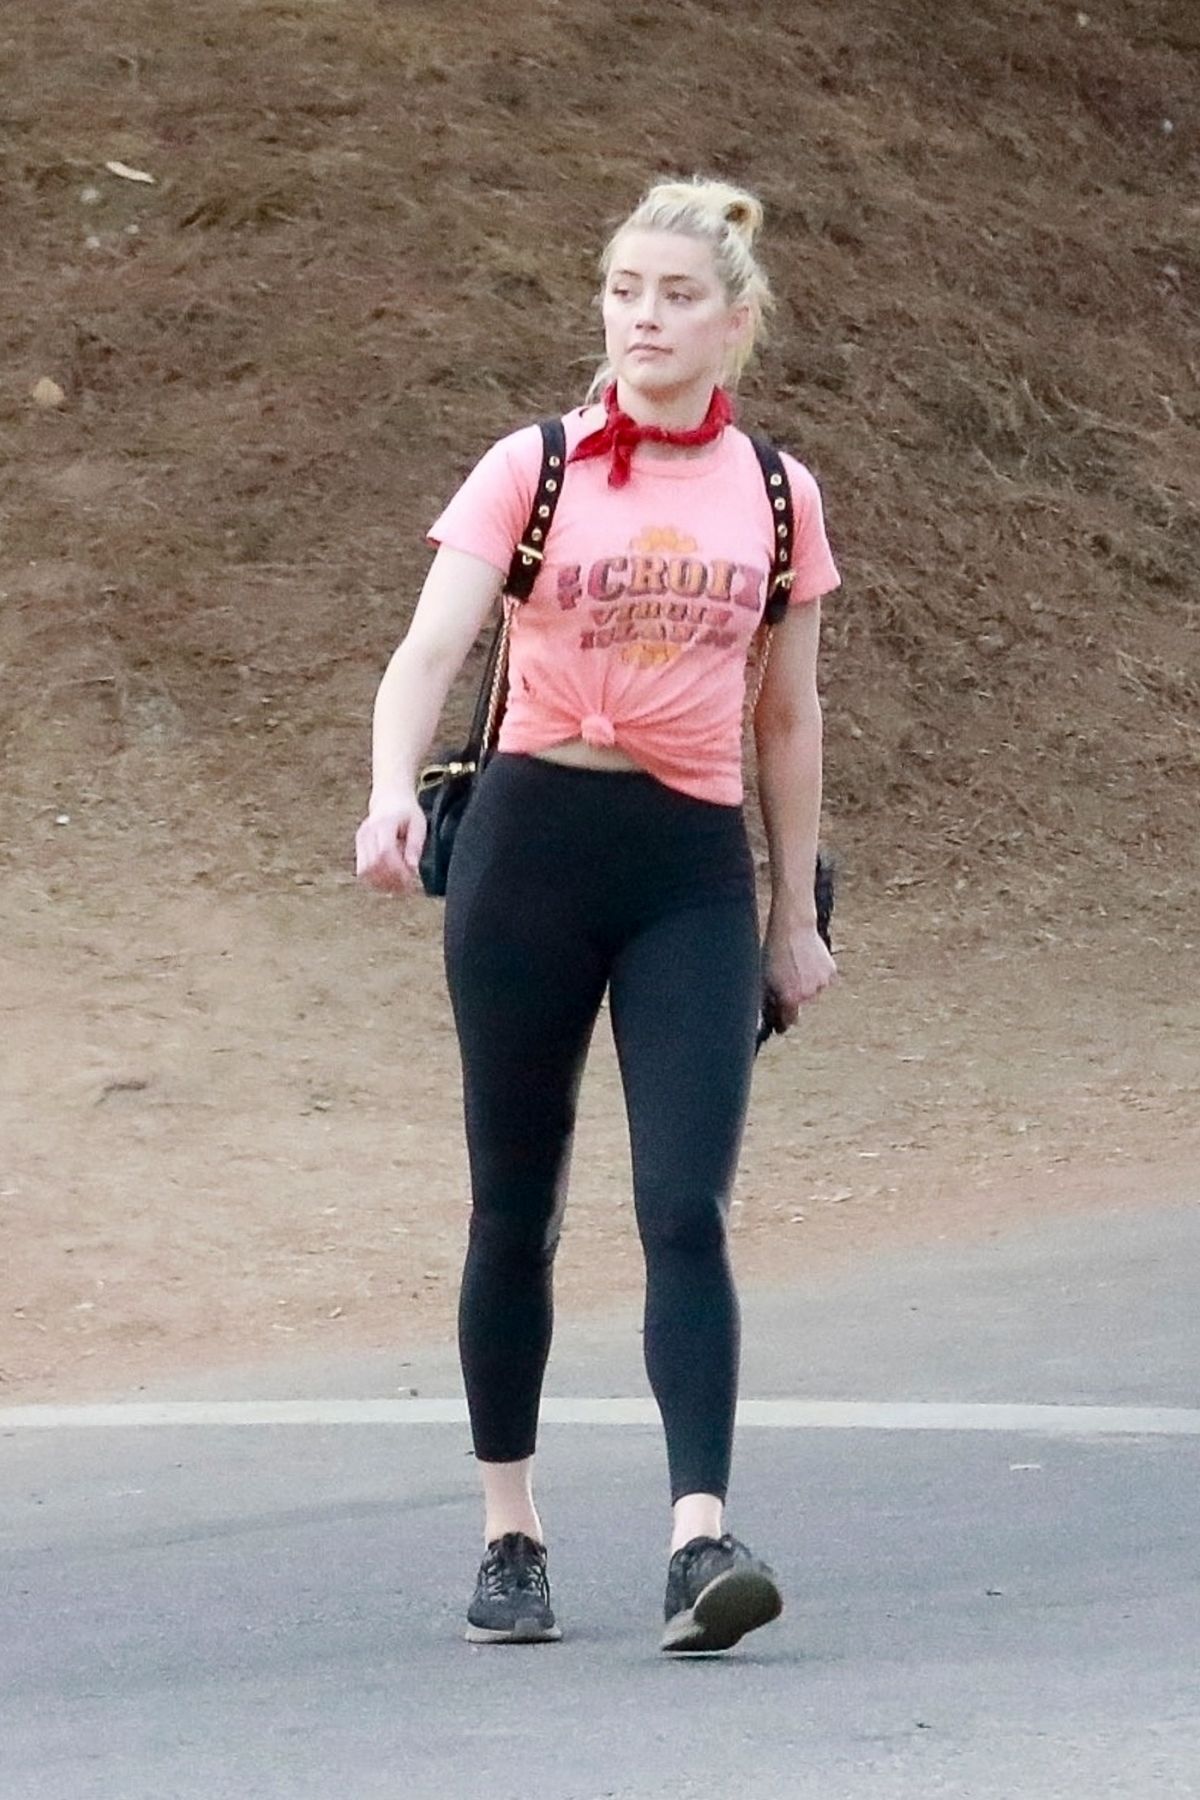 amber-heard-out-hiking-in-los-angeles-11-16-2020-4.jpg